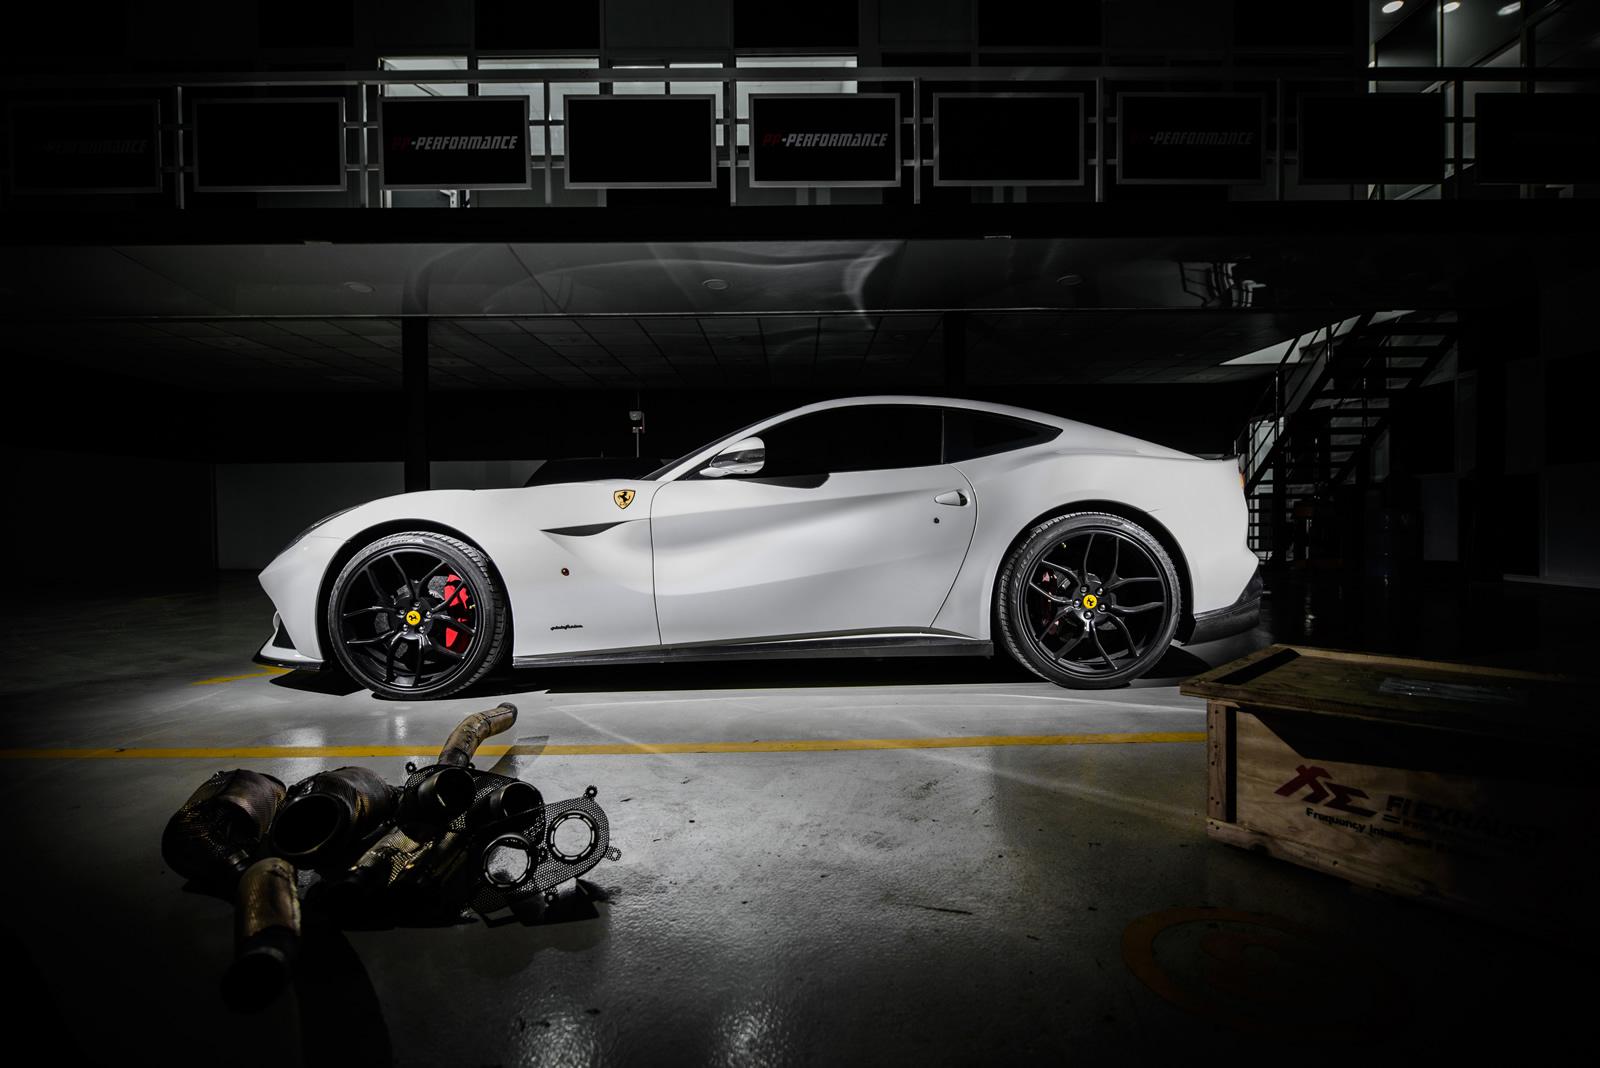 Cam-Shaft will Foil Wrap your Ferrari F12berlinetta from Top to